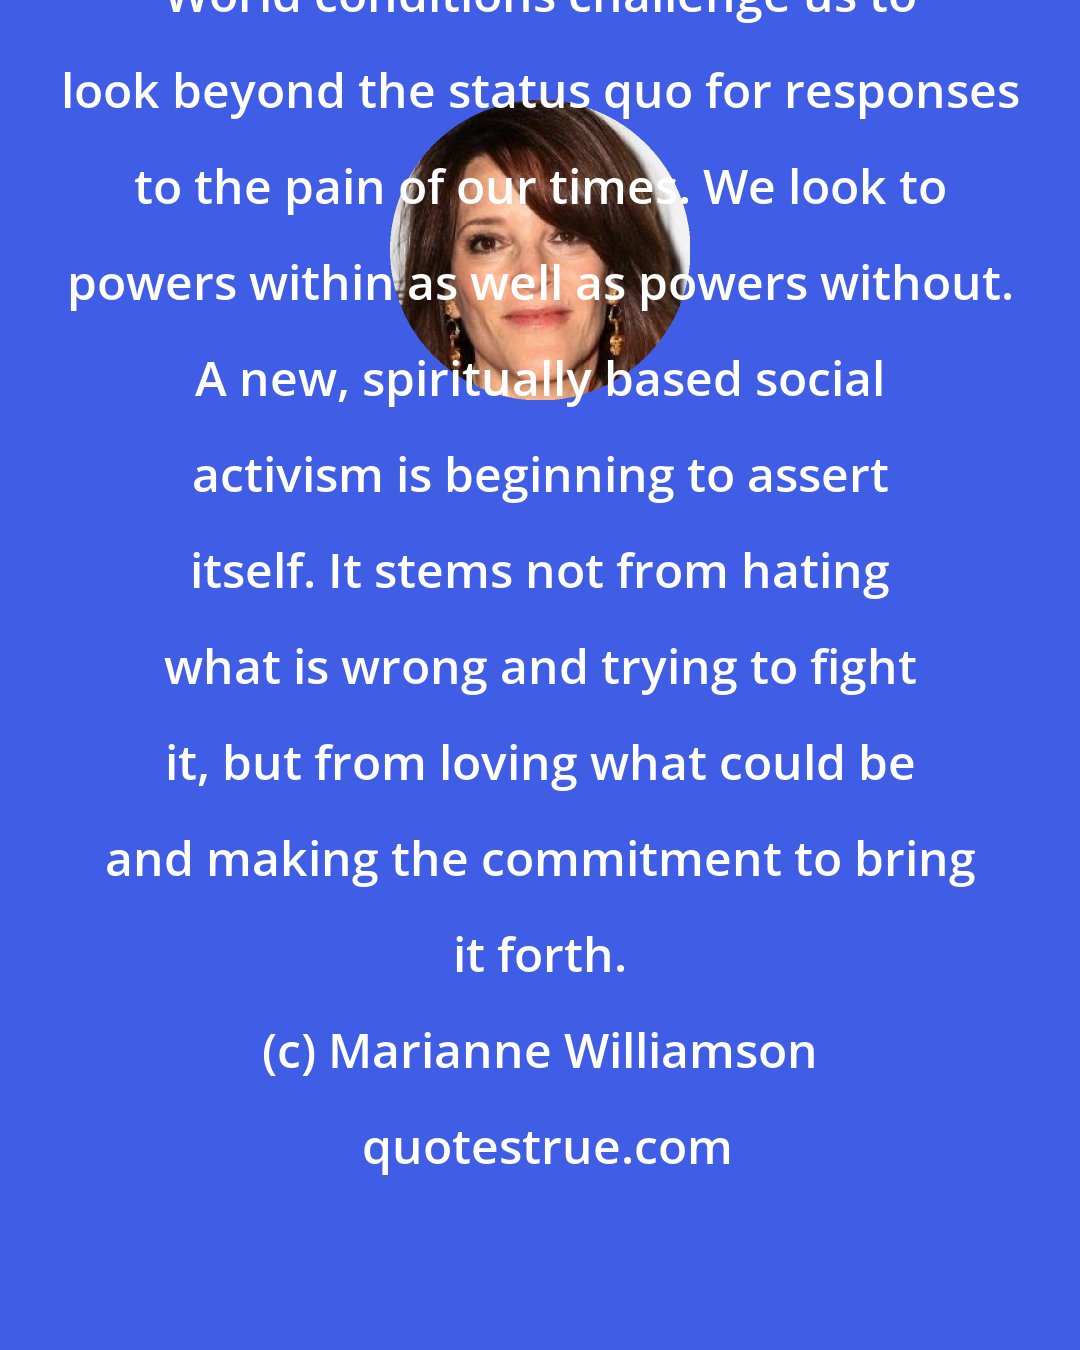 Marianne Williamson: World conditions challenge us to look beyond the status quo for responses to the pain of our times. We look to powers within as well as powers without. A new, spiritually based social activism is beginning to assert itself. It stems not from hating what is wrong and trying to fight it, but from loving what could be and making the commitment to bring it forth.